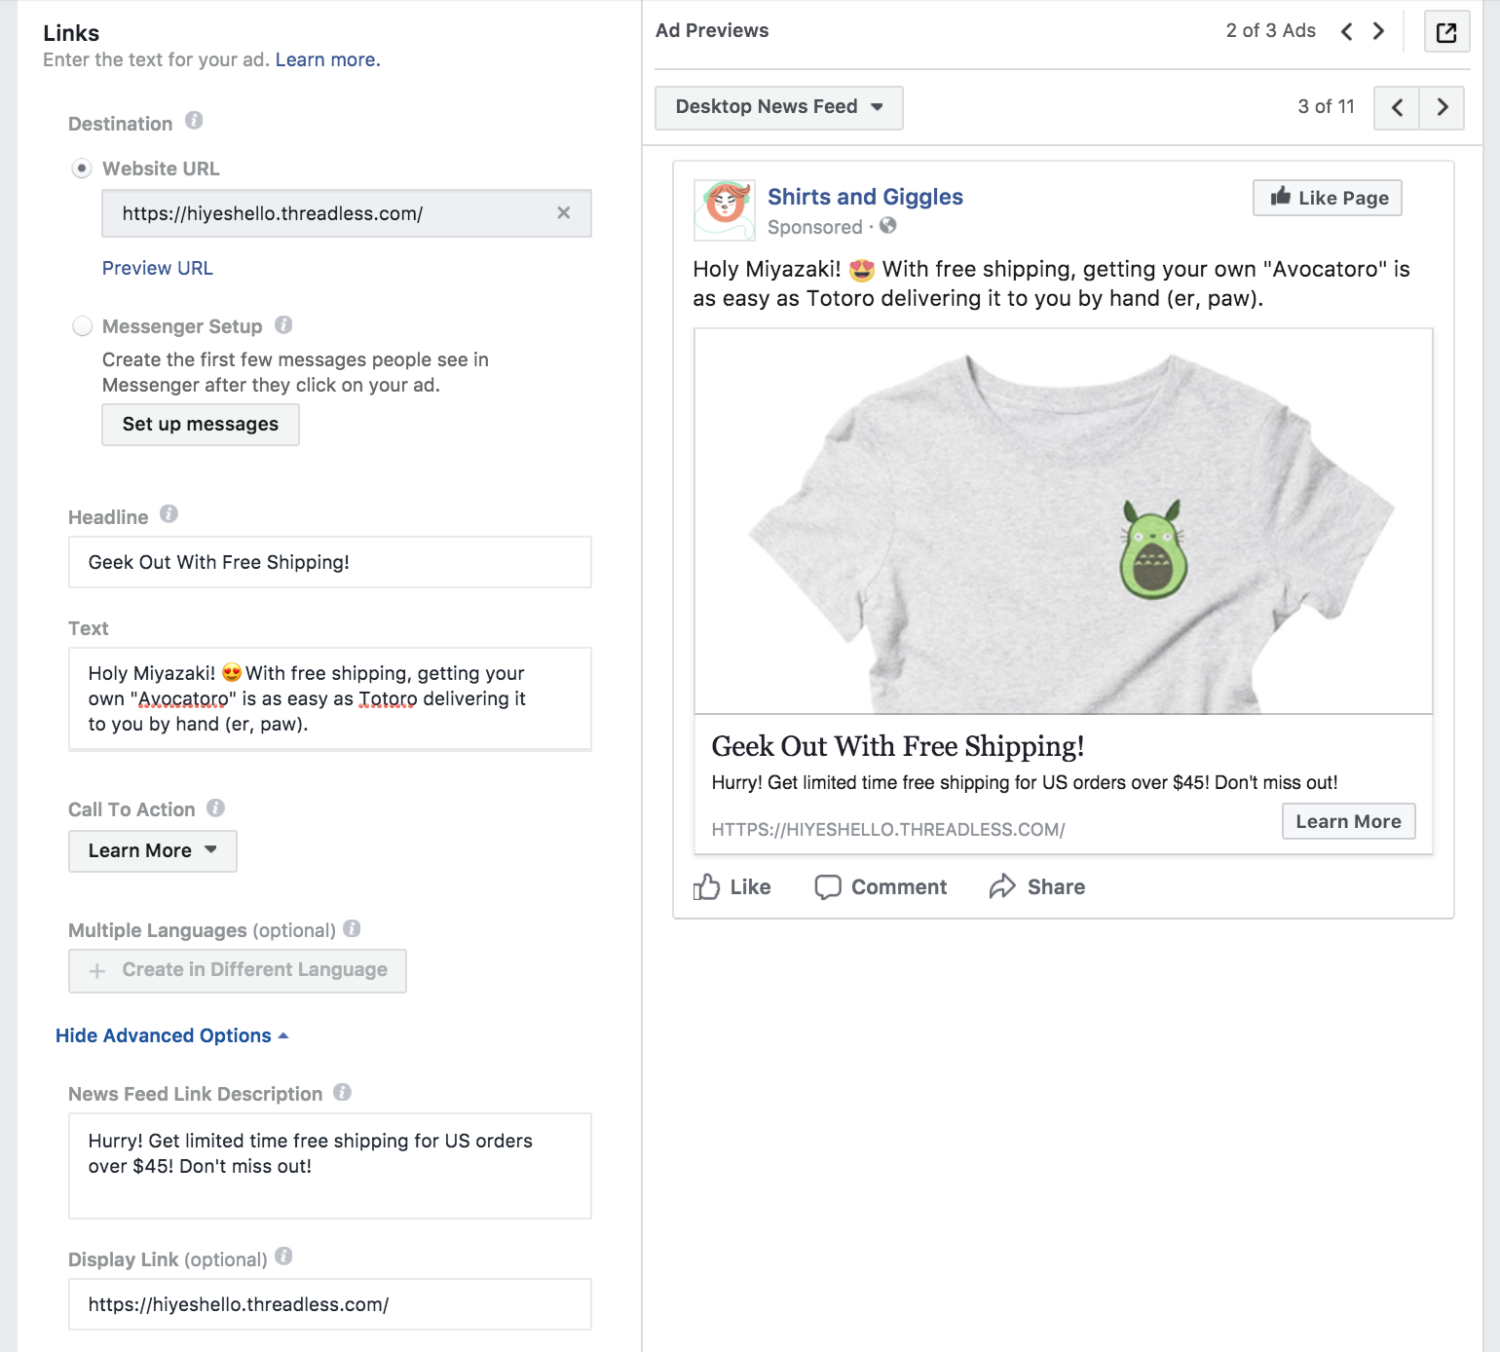 How to Create an Effective Facebook Ad - Creative Resources